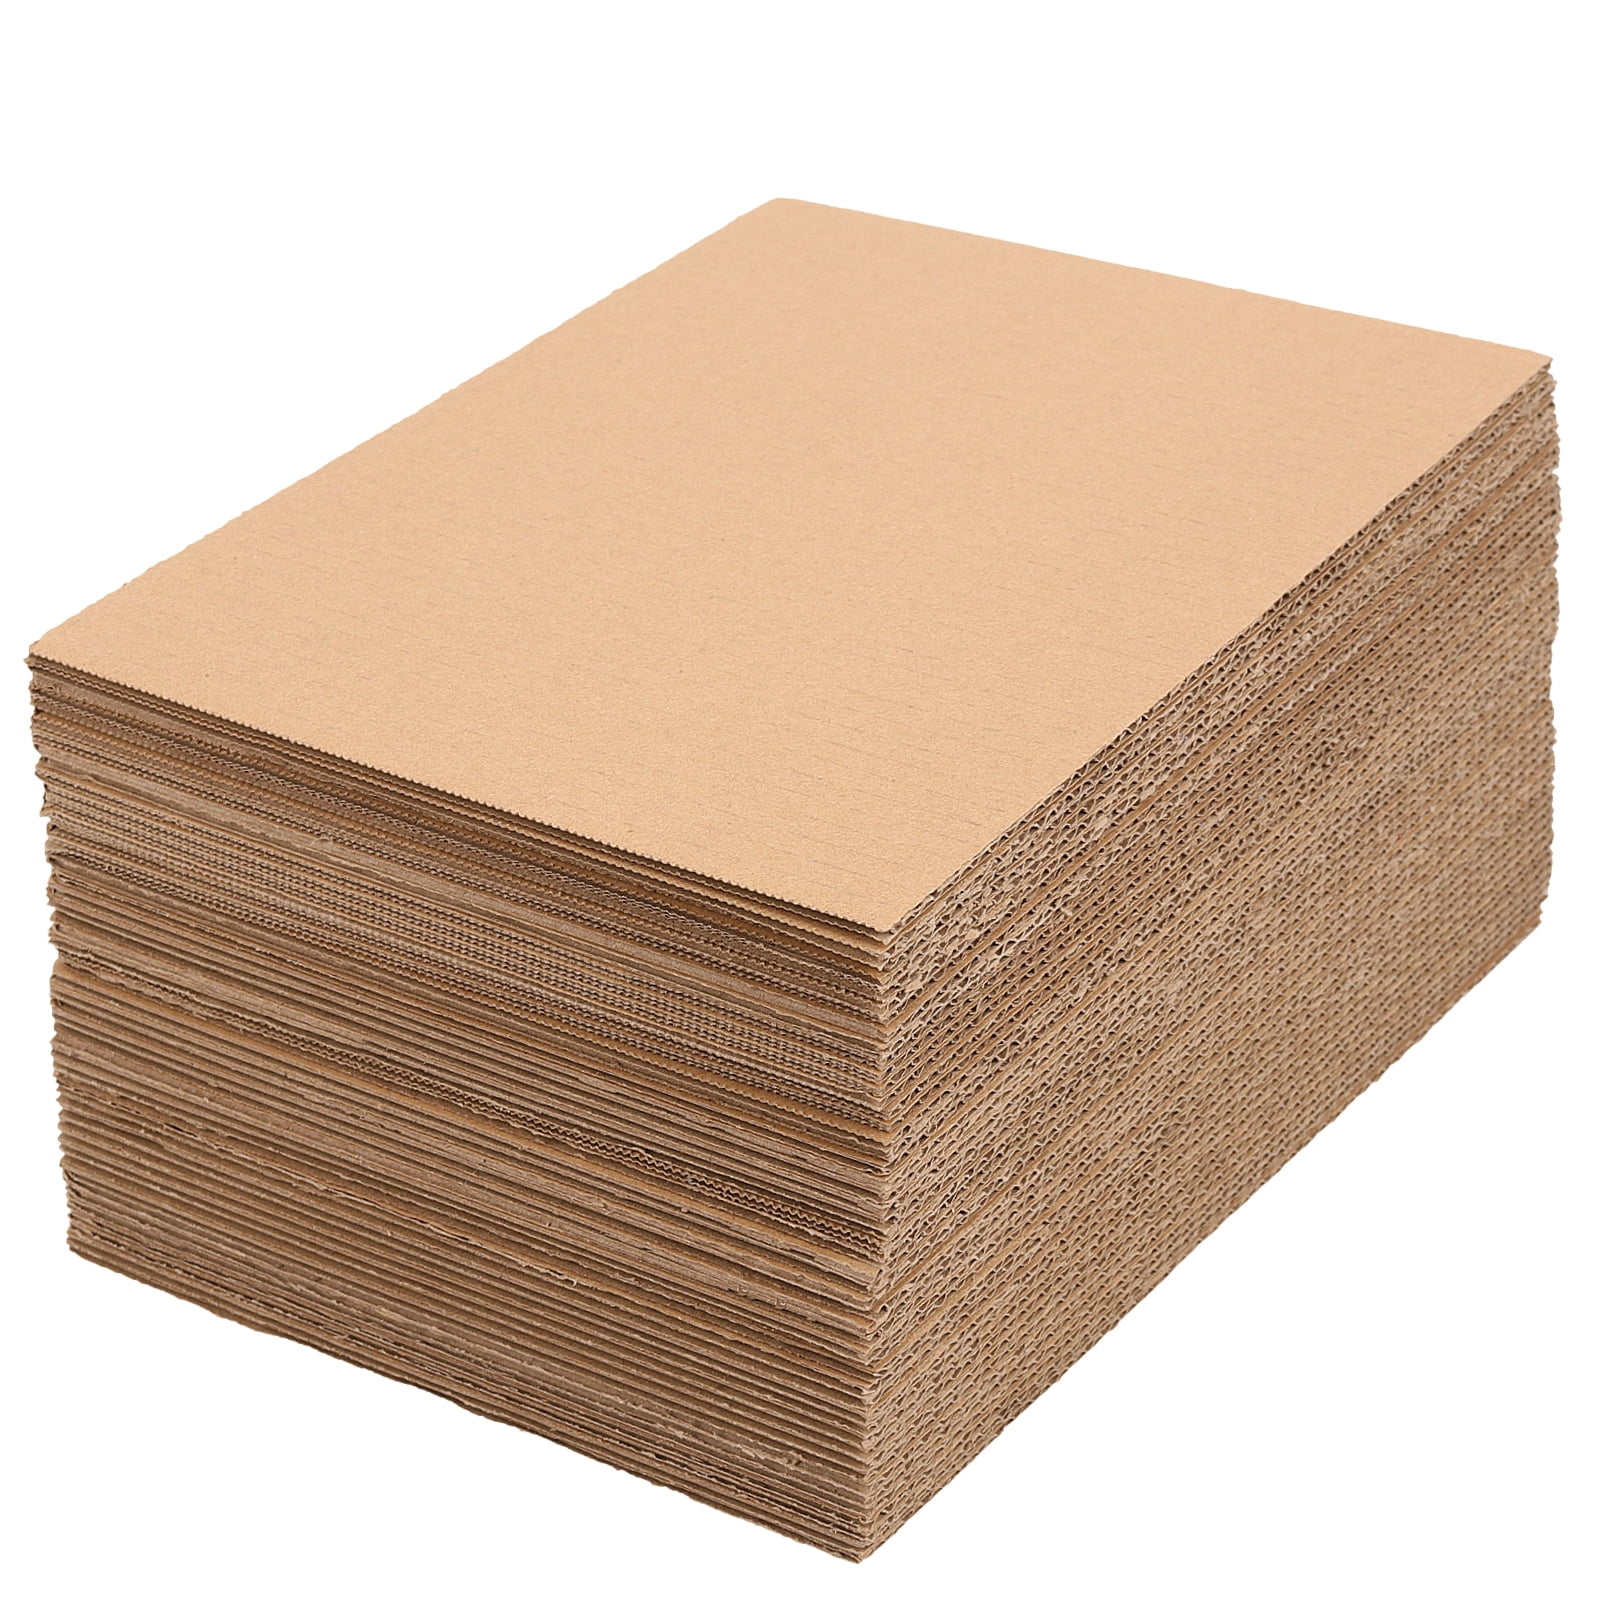 Box USA Large Cardboard Sheets 16L x 16W, 50-Pack | Corrugated Thin Sheets for Shipping, Packing, Moving and Storage Supplies 16x16 1616